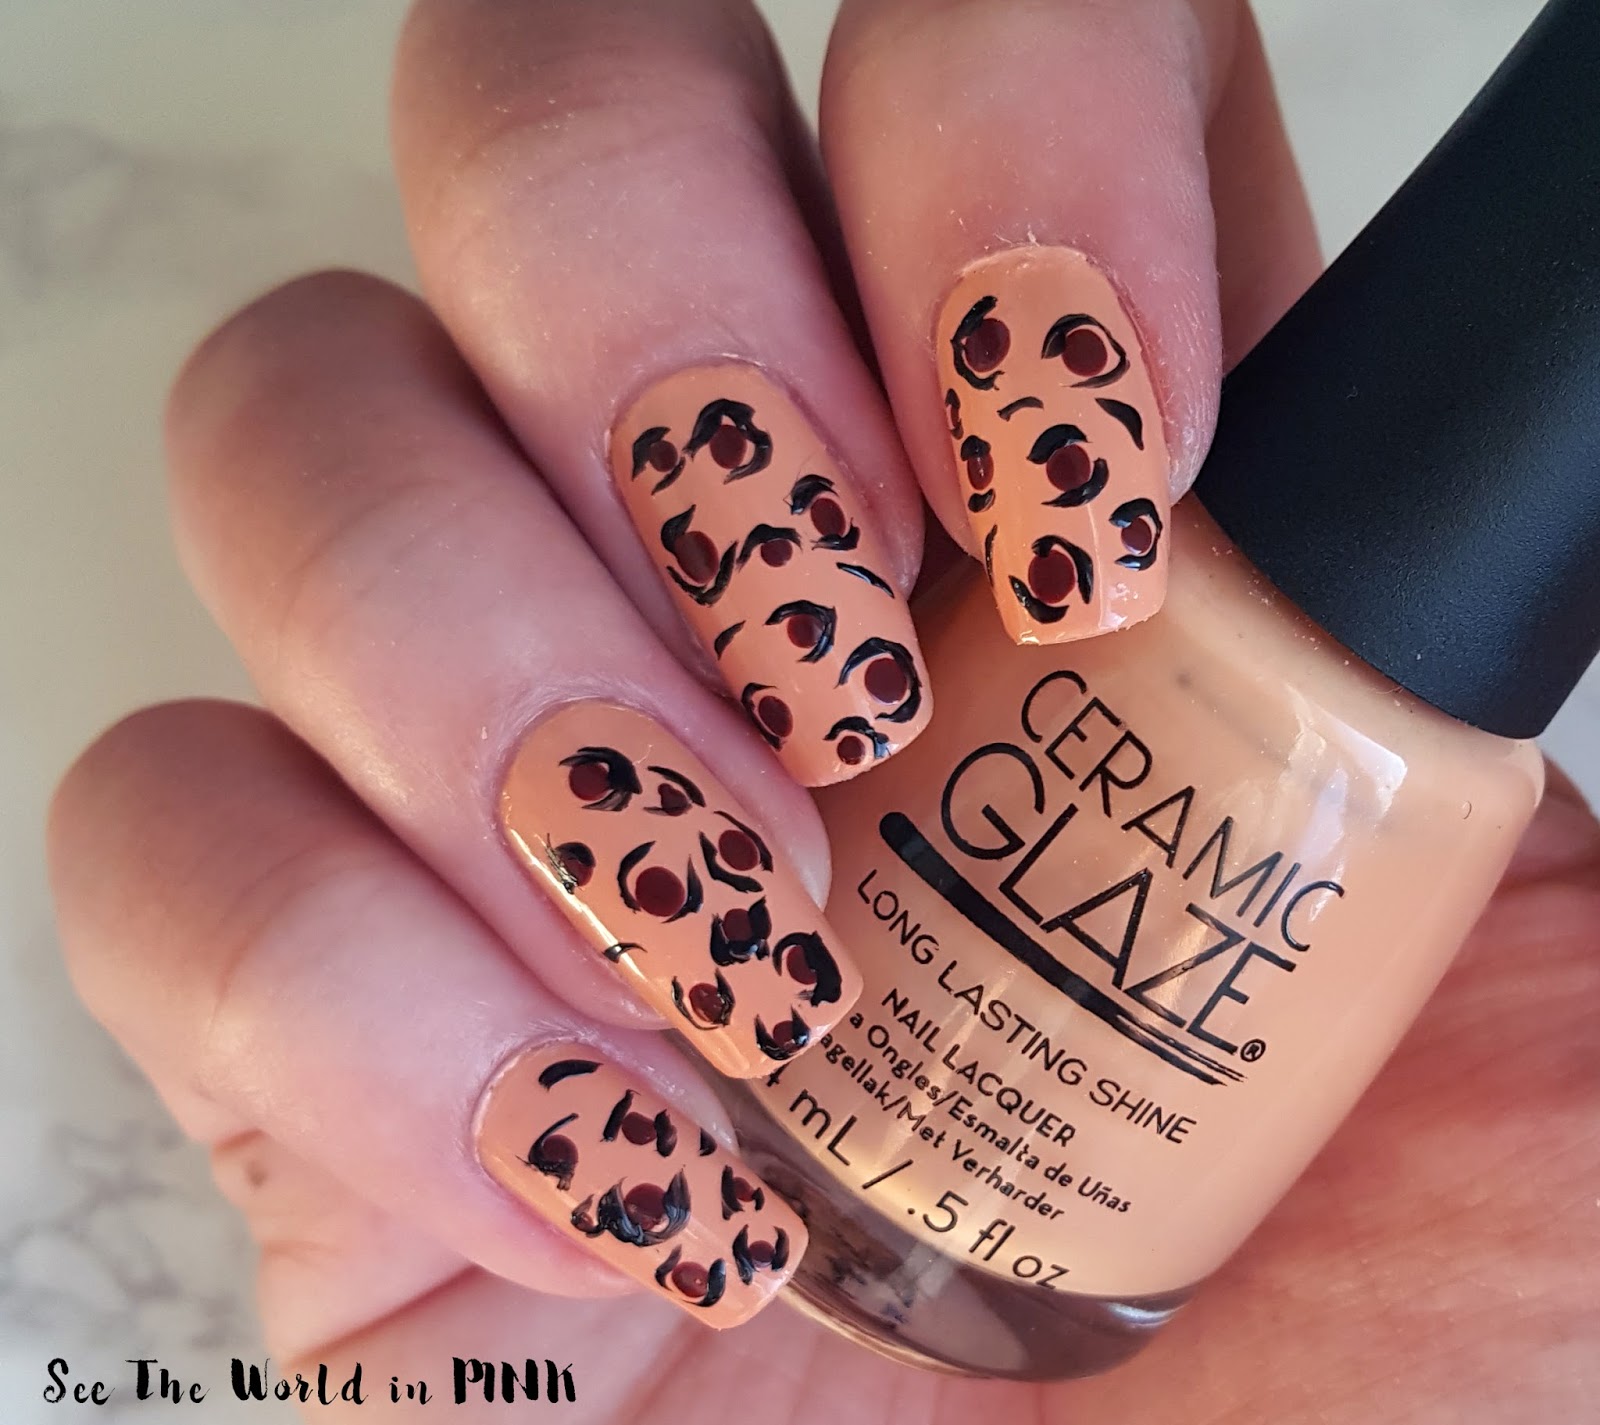 Leopard-Effect Nails by Nails.INC